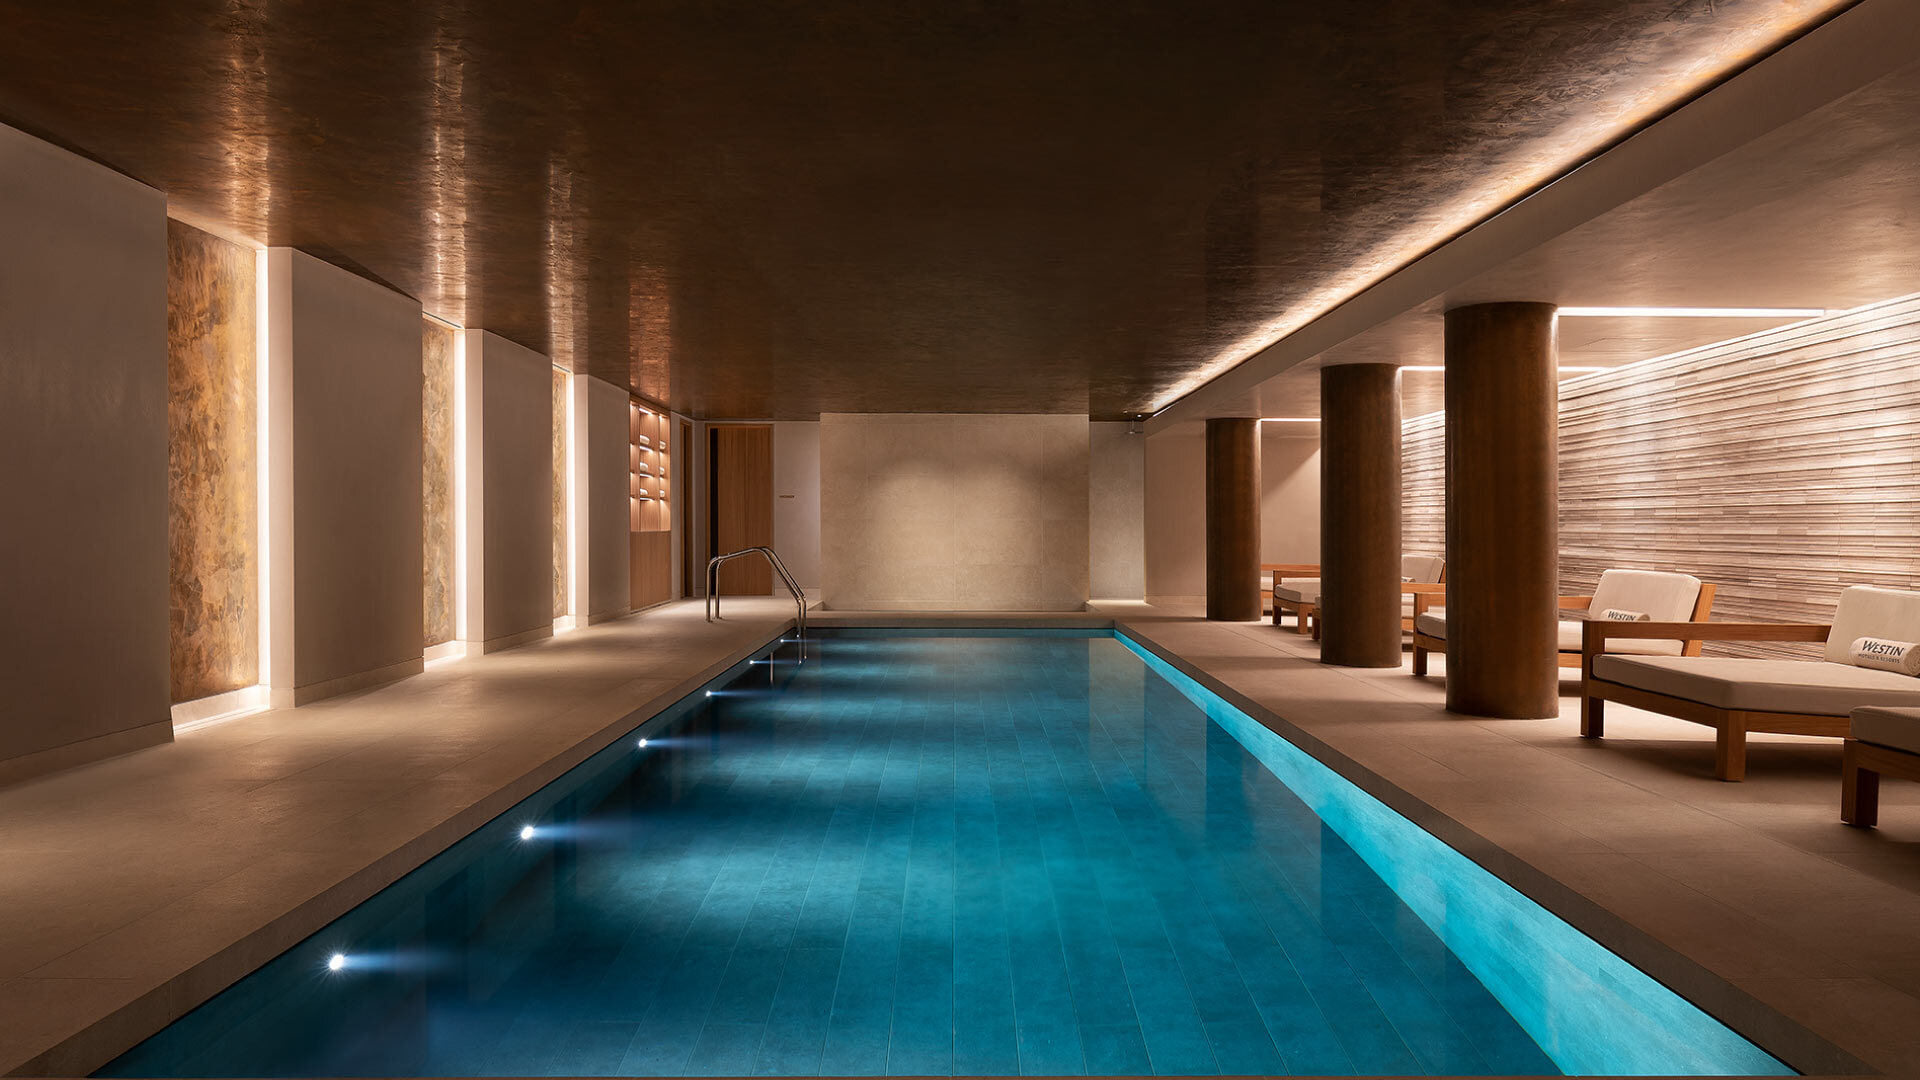 5 best Spas in the City of London - Heavenly Spa Pool - pristine still indoor pool with loungers along the side